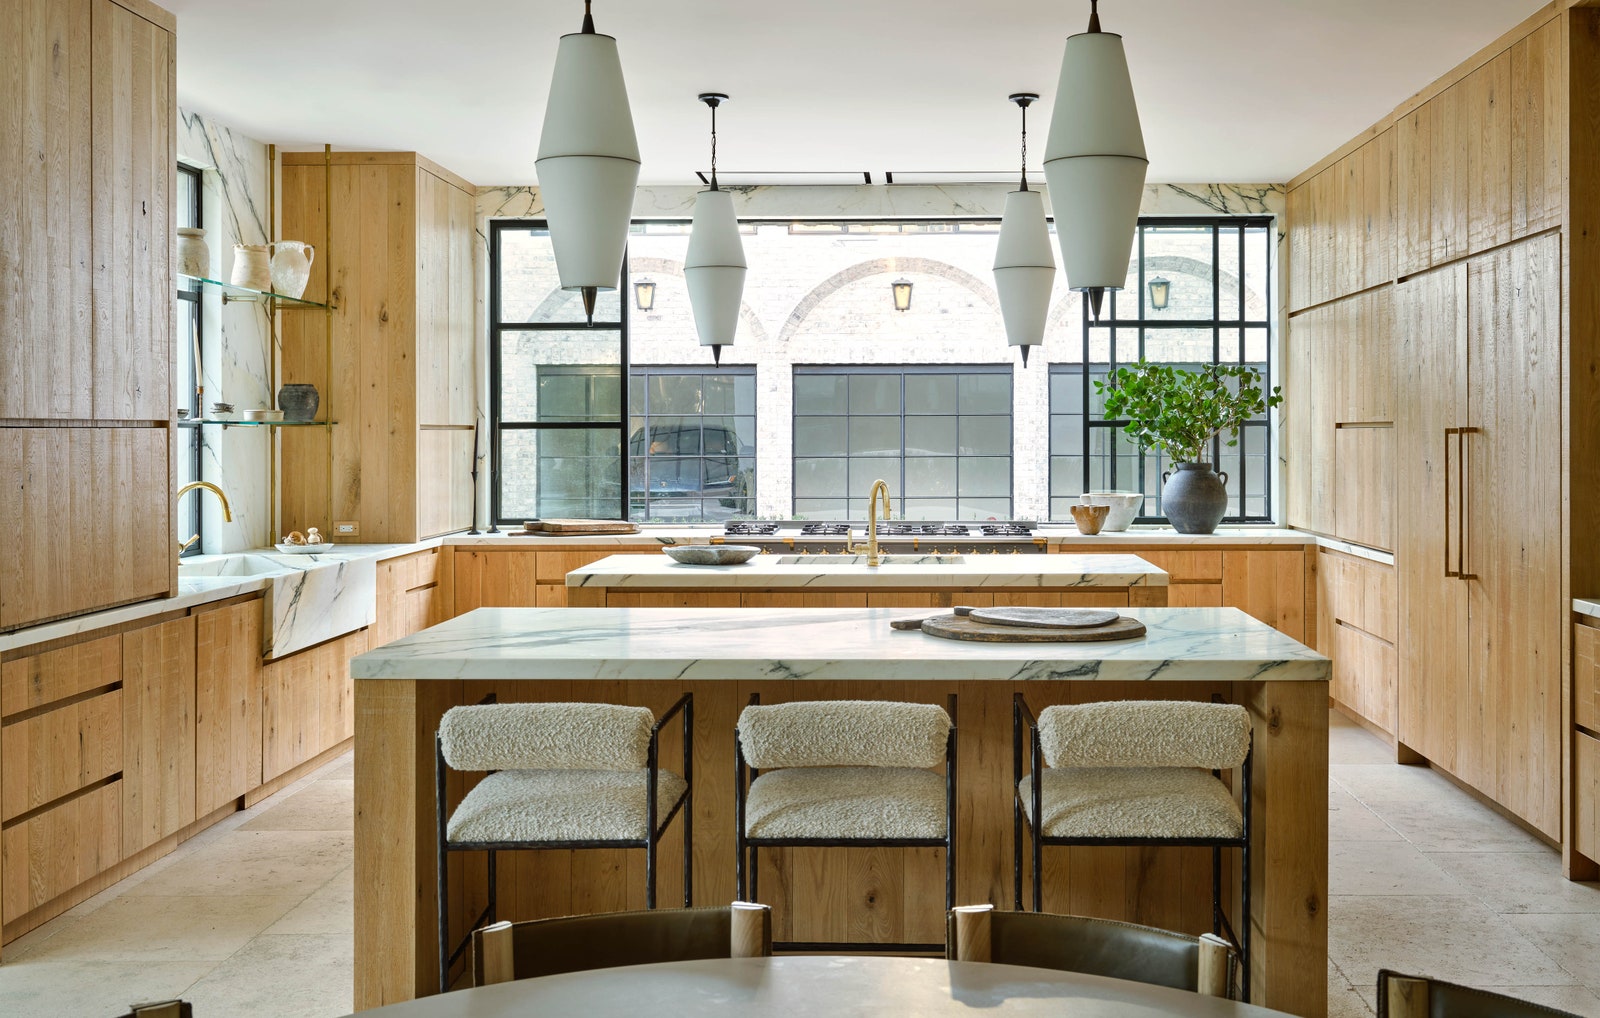 LA Home kitchen with arteriors benches upholstered in linen